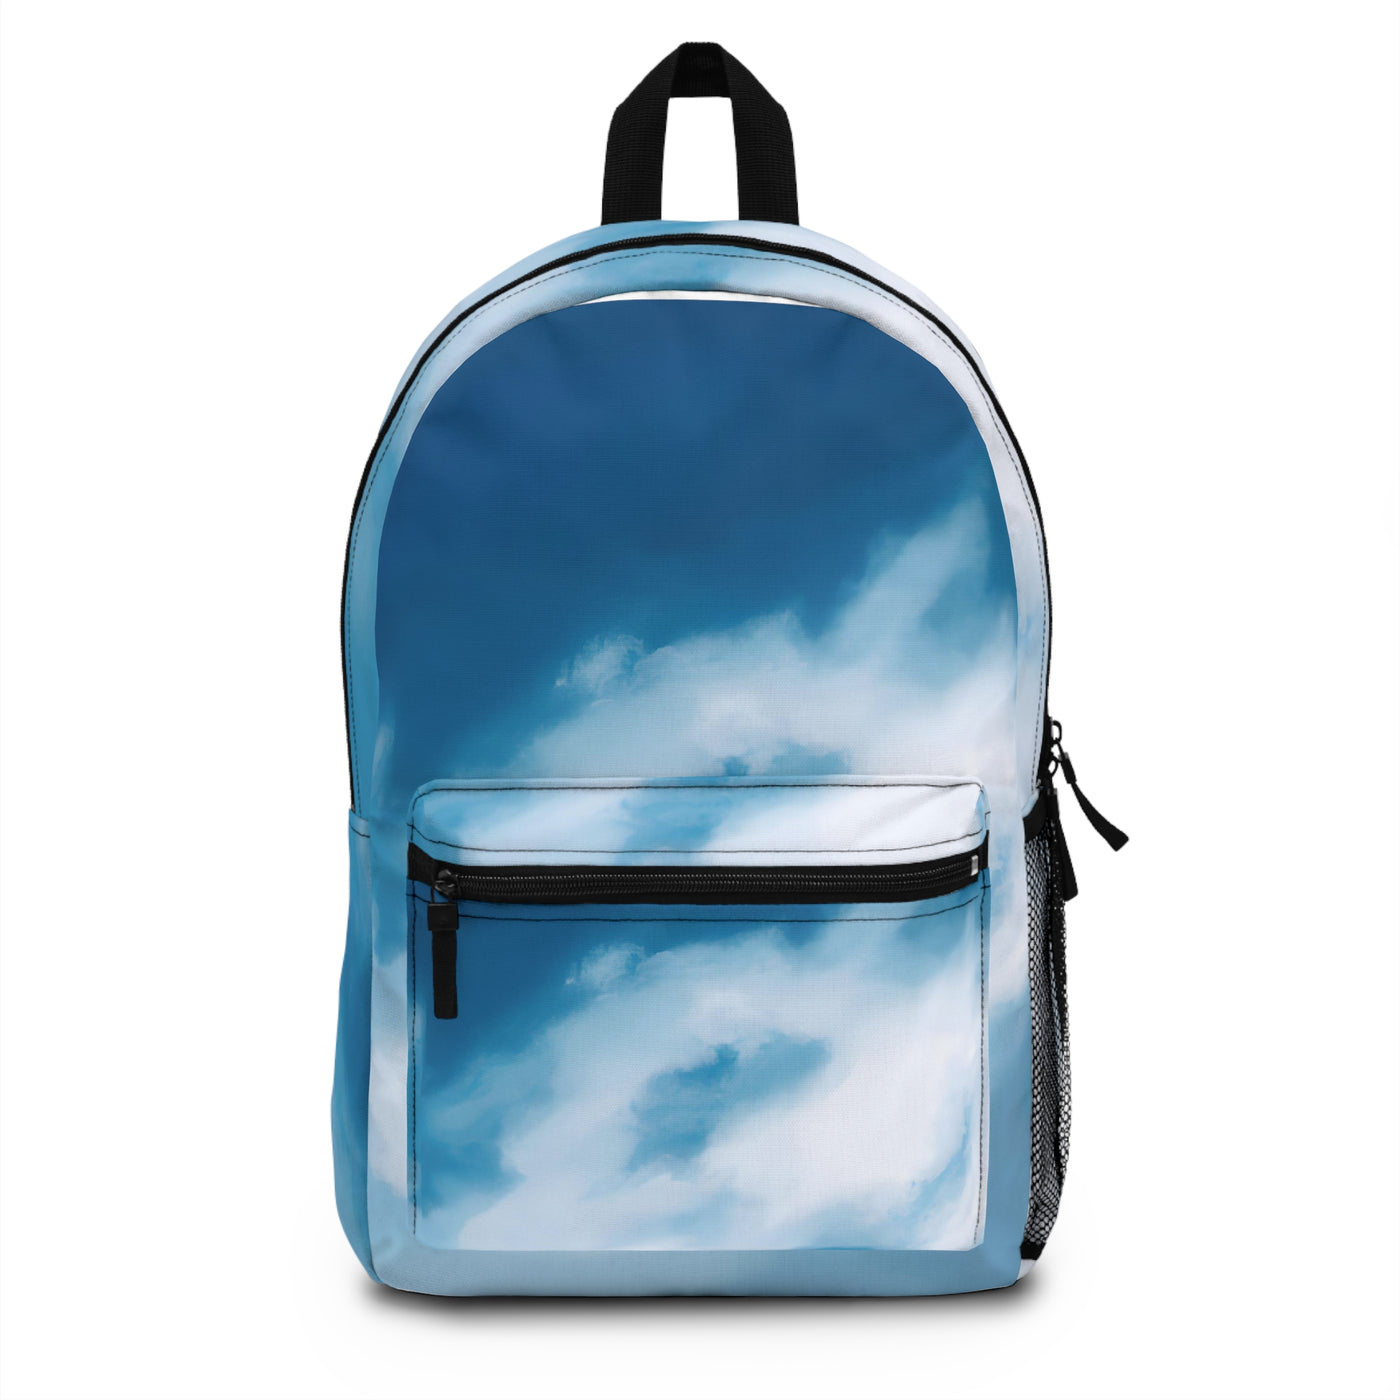 "Amazingly Awesome, Cloudy Skies!" Backpack